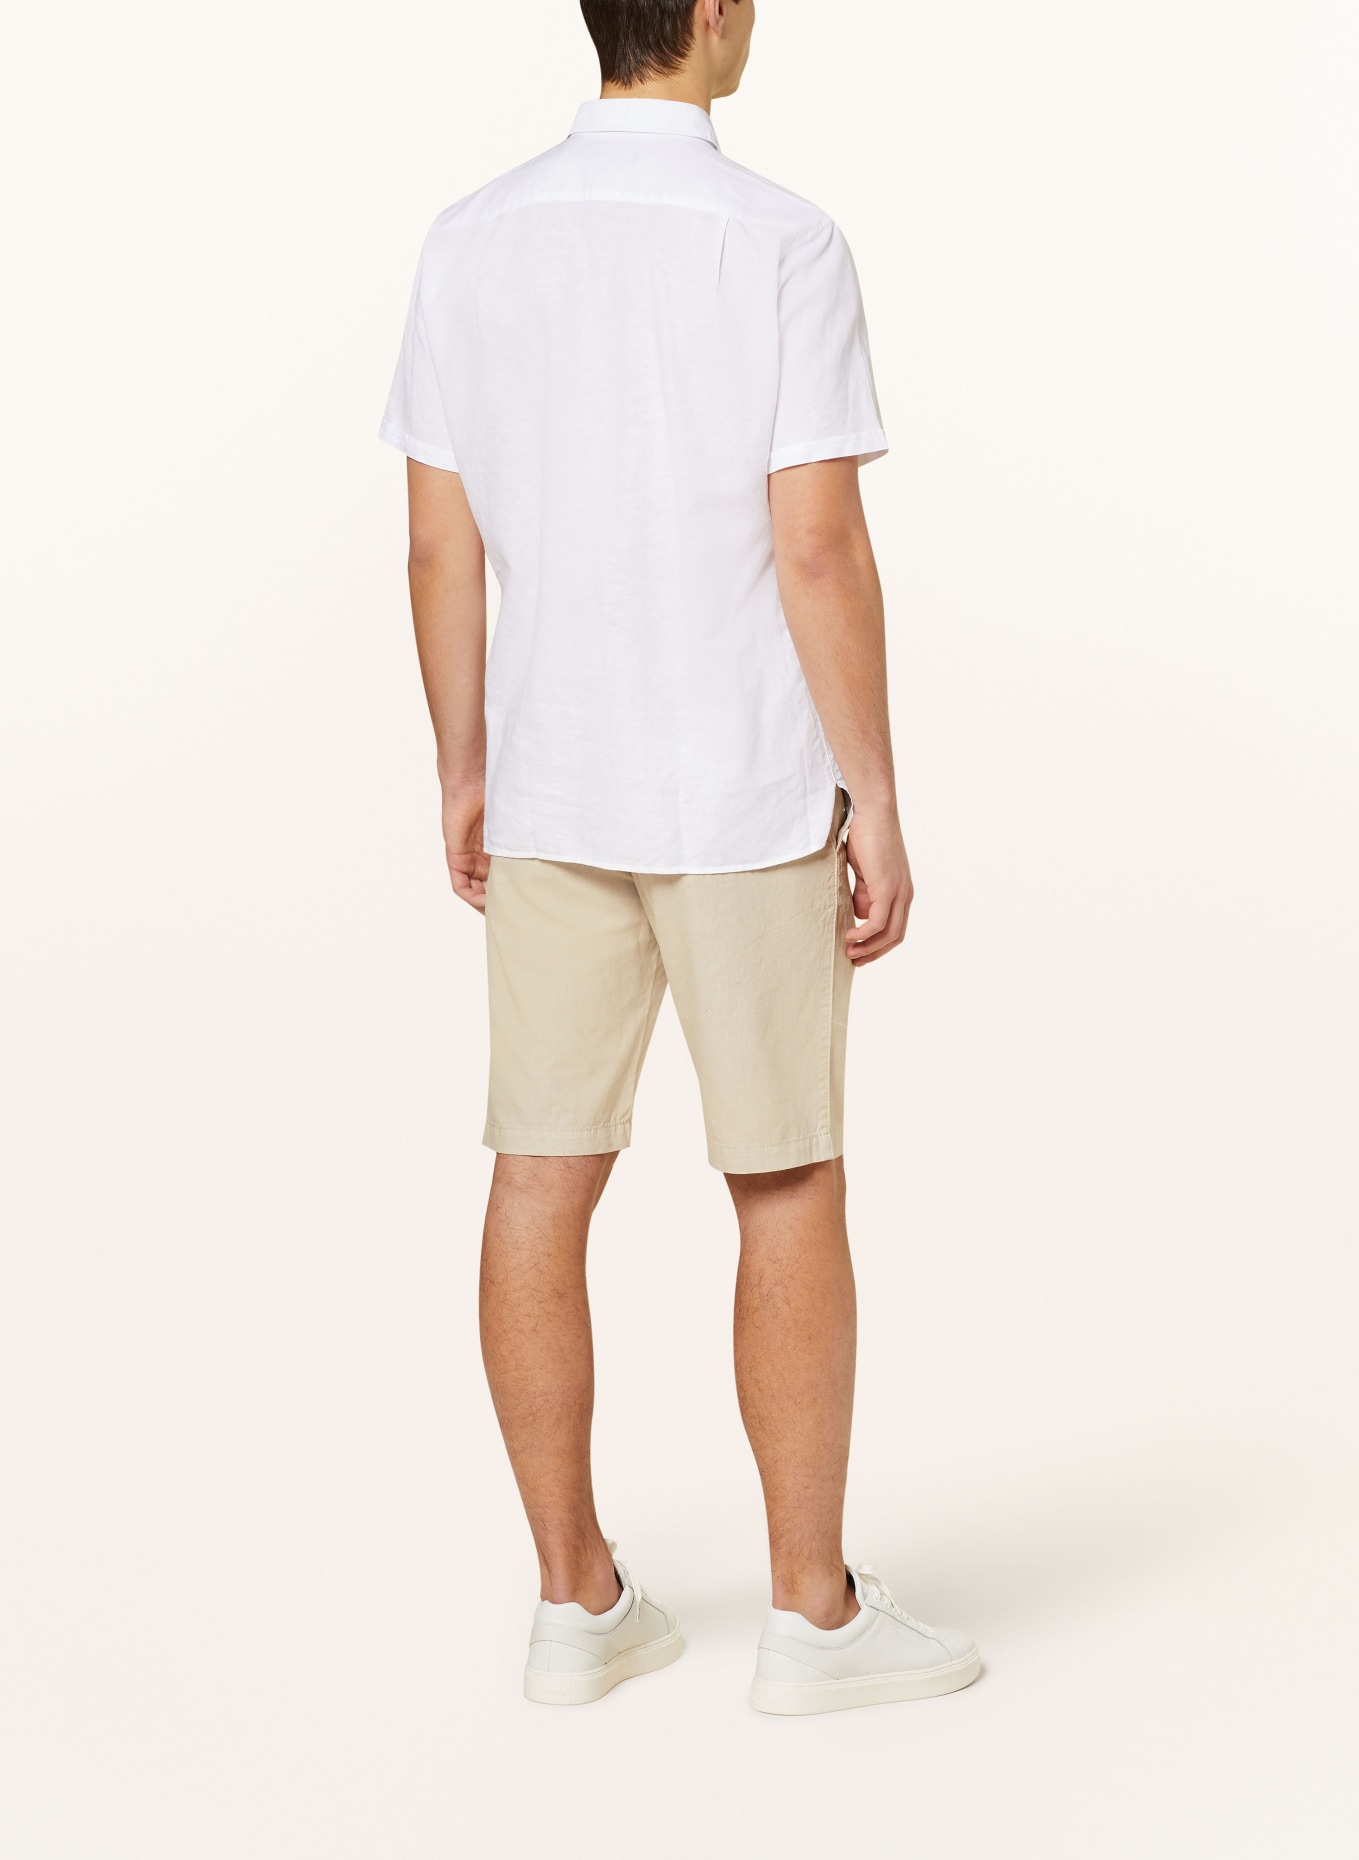 STROKESMAN'S Short sleeve shirt regular fit with linen, Color: WHITE (Image 3)